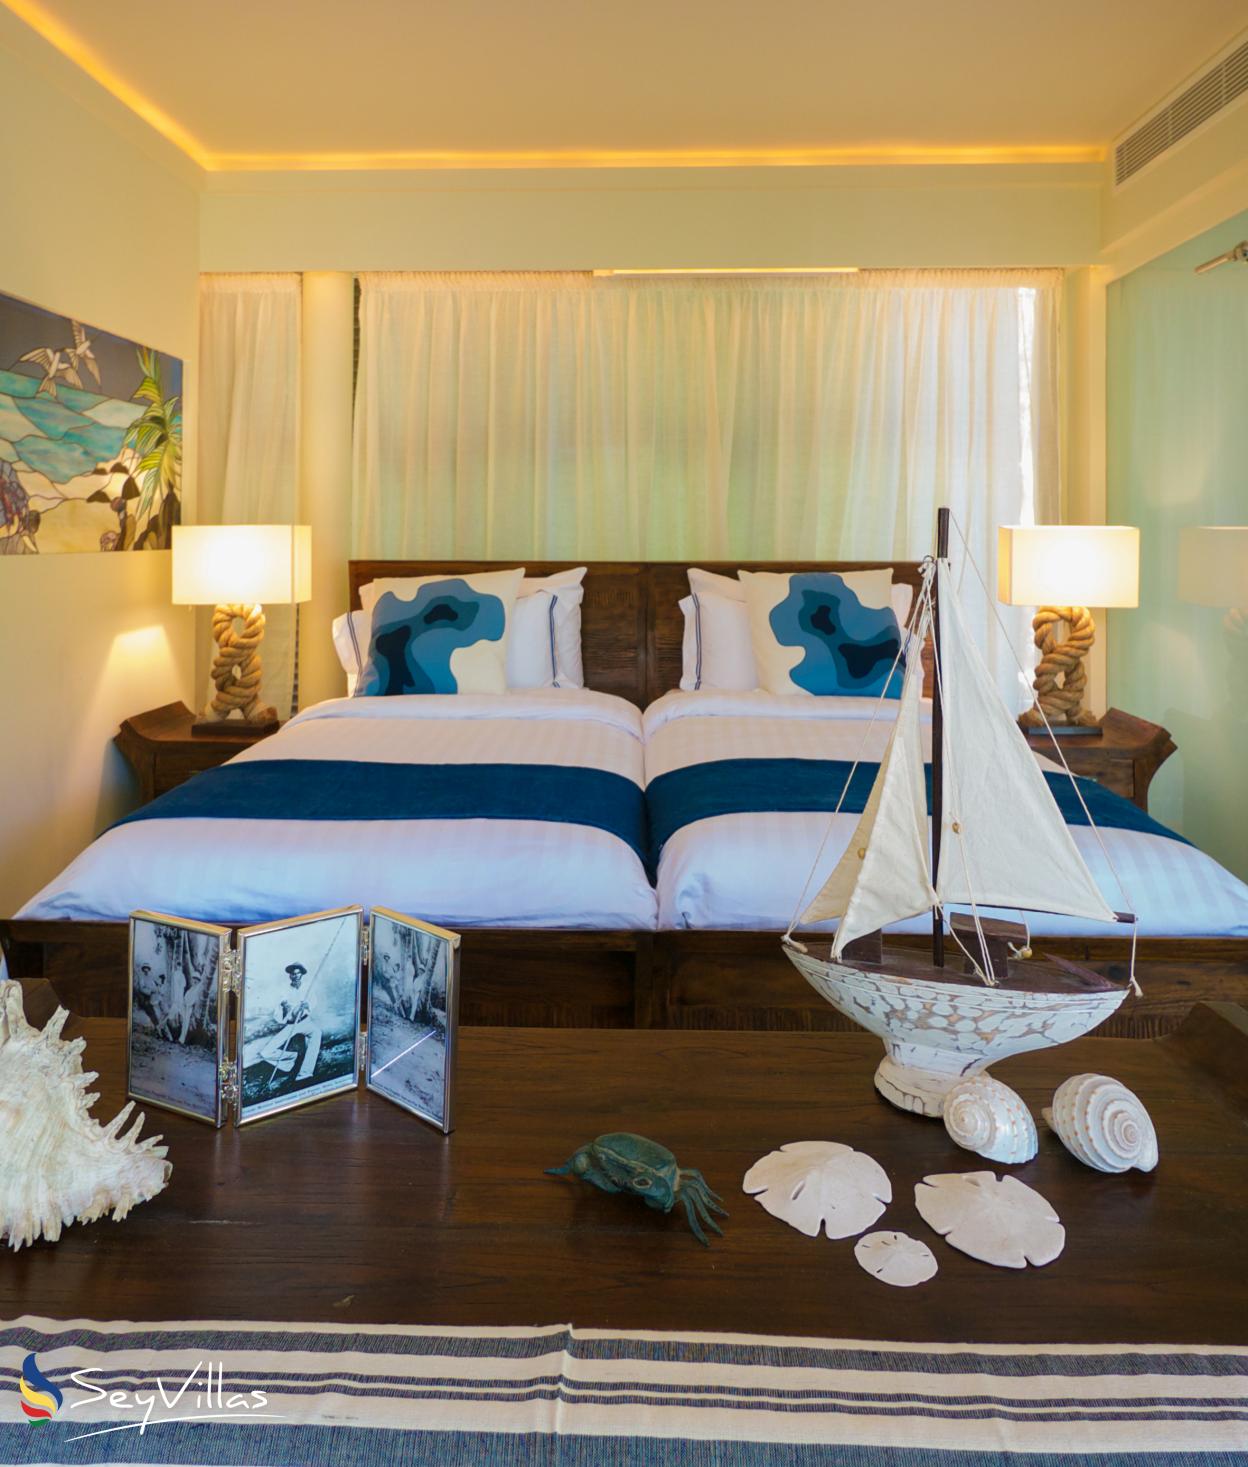 Photo 73: Dhevatara Beach Hotel - Classic Suite with Kingsize Bed - Praslin (Seychelles)